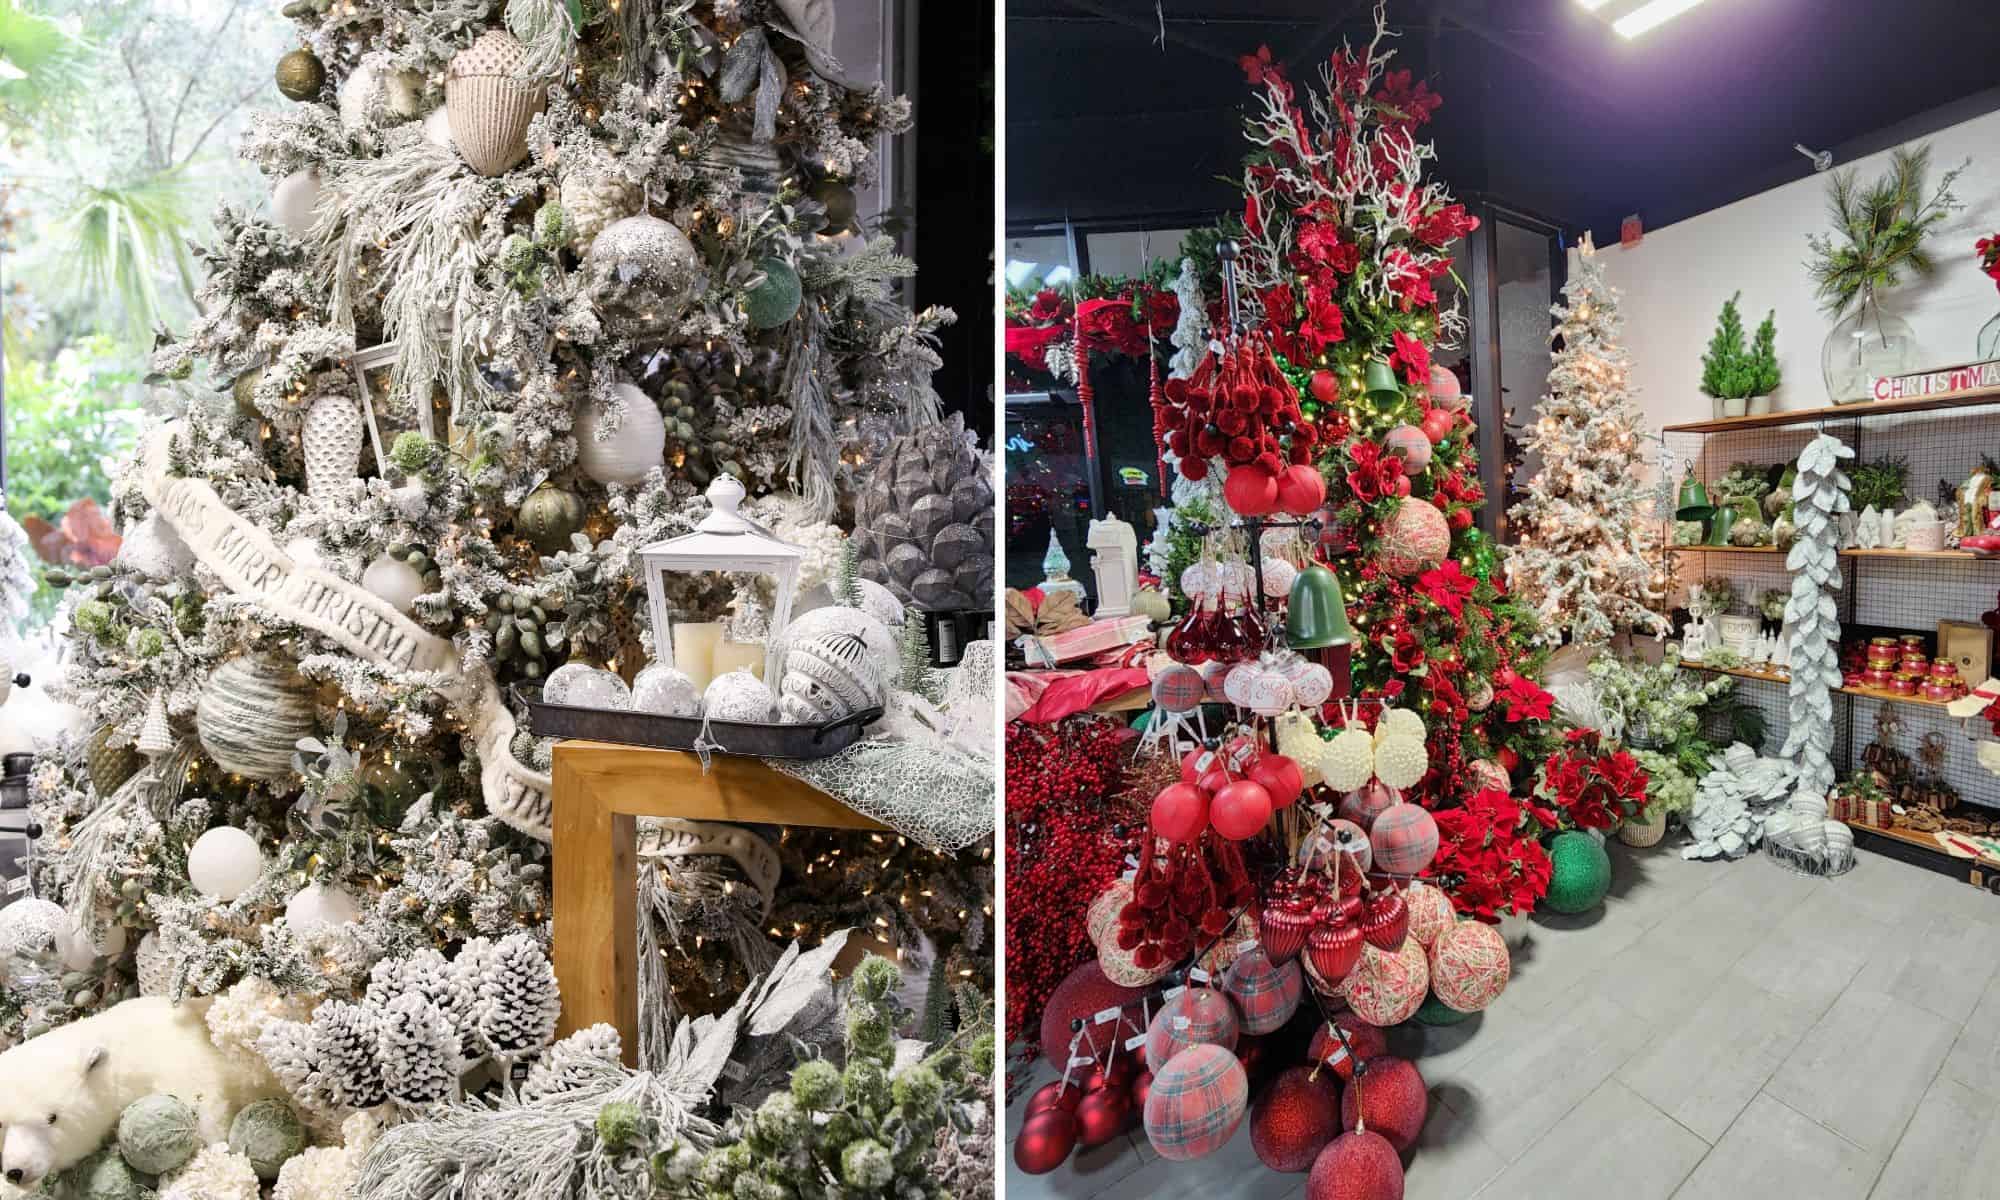 holiday decorations including a christmas tree, ornaments, and other seasonal decoration ideas in both Lake Mary and orlando stores